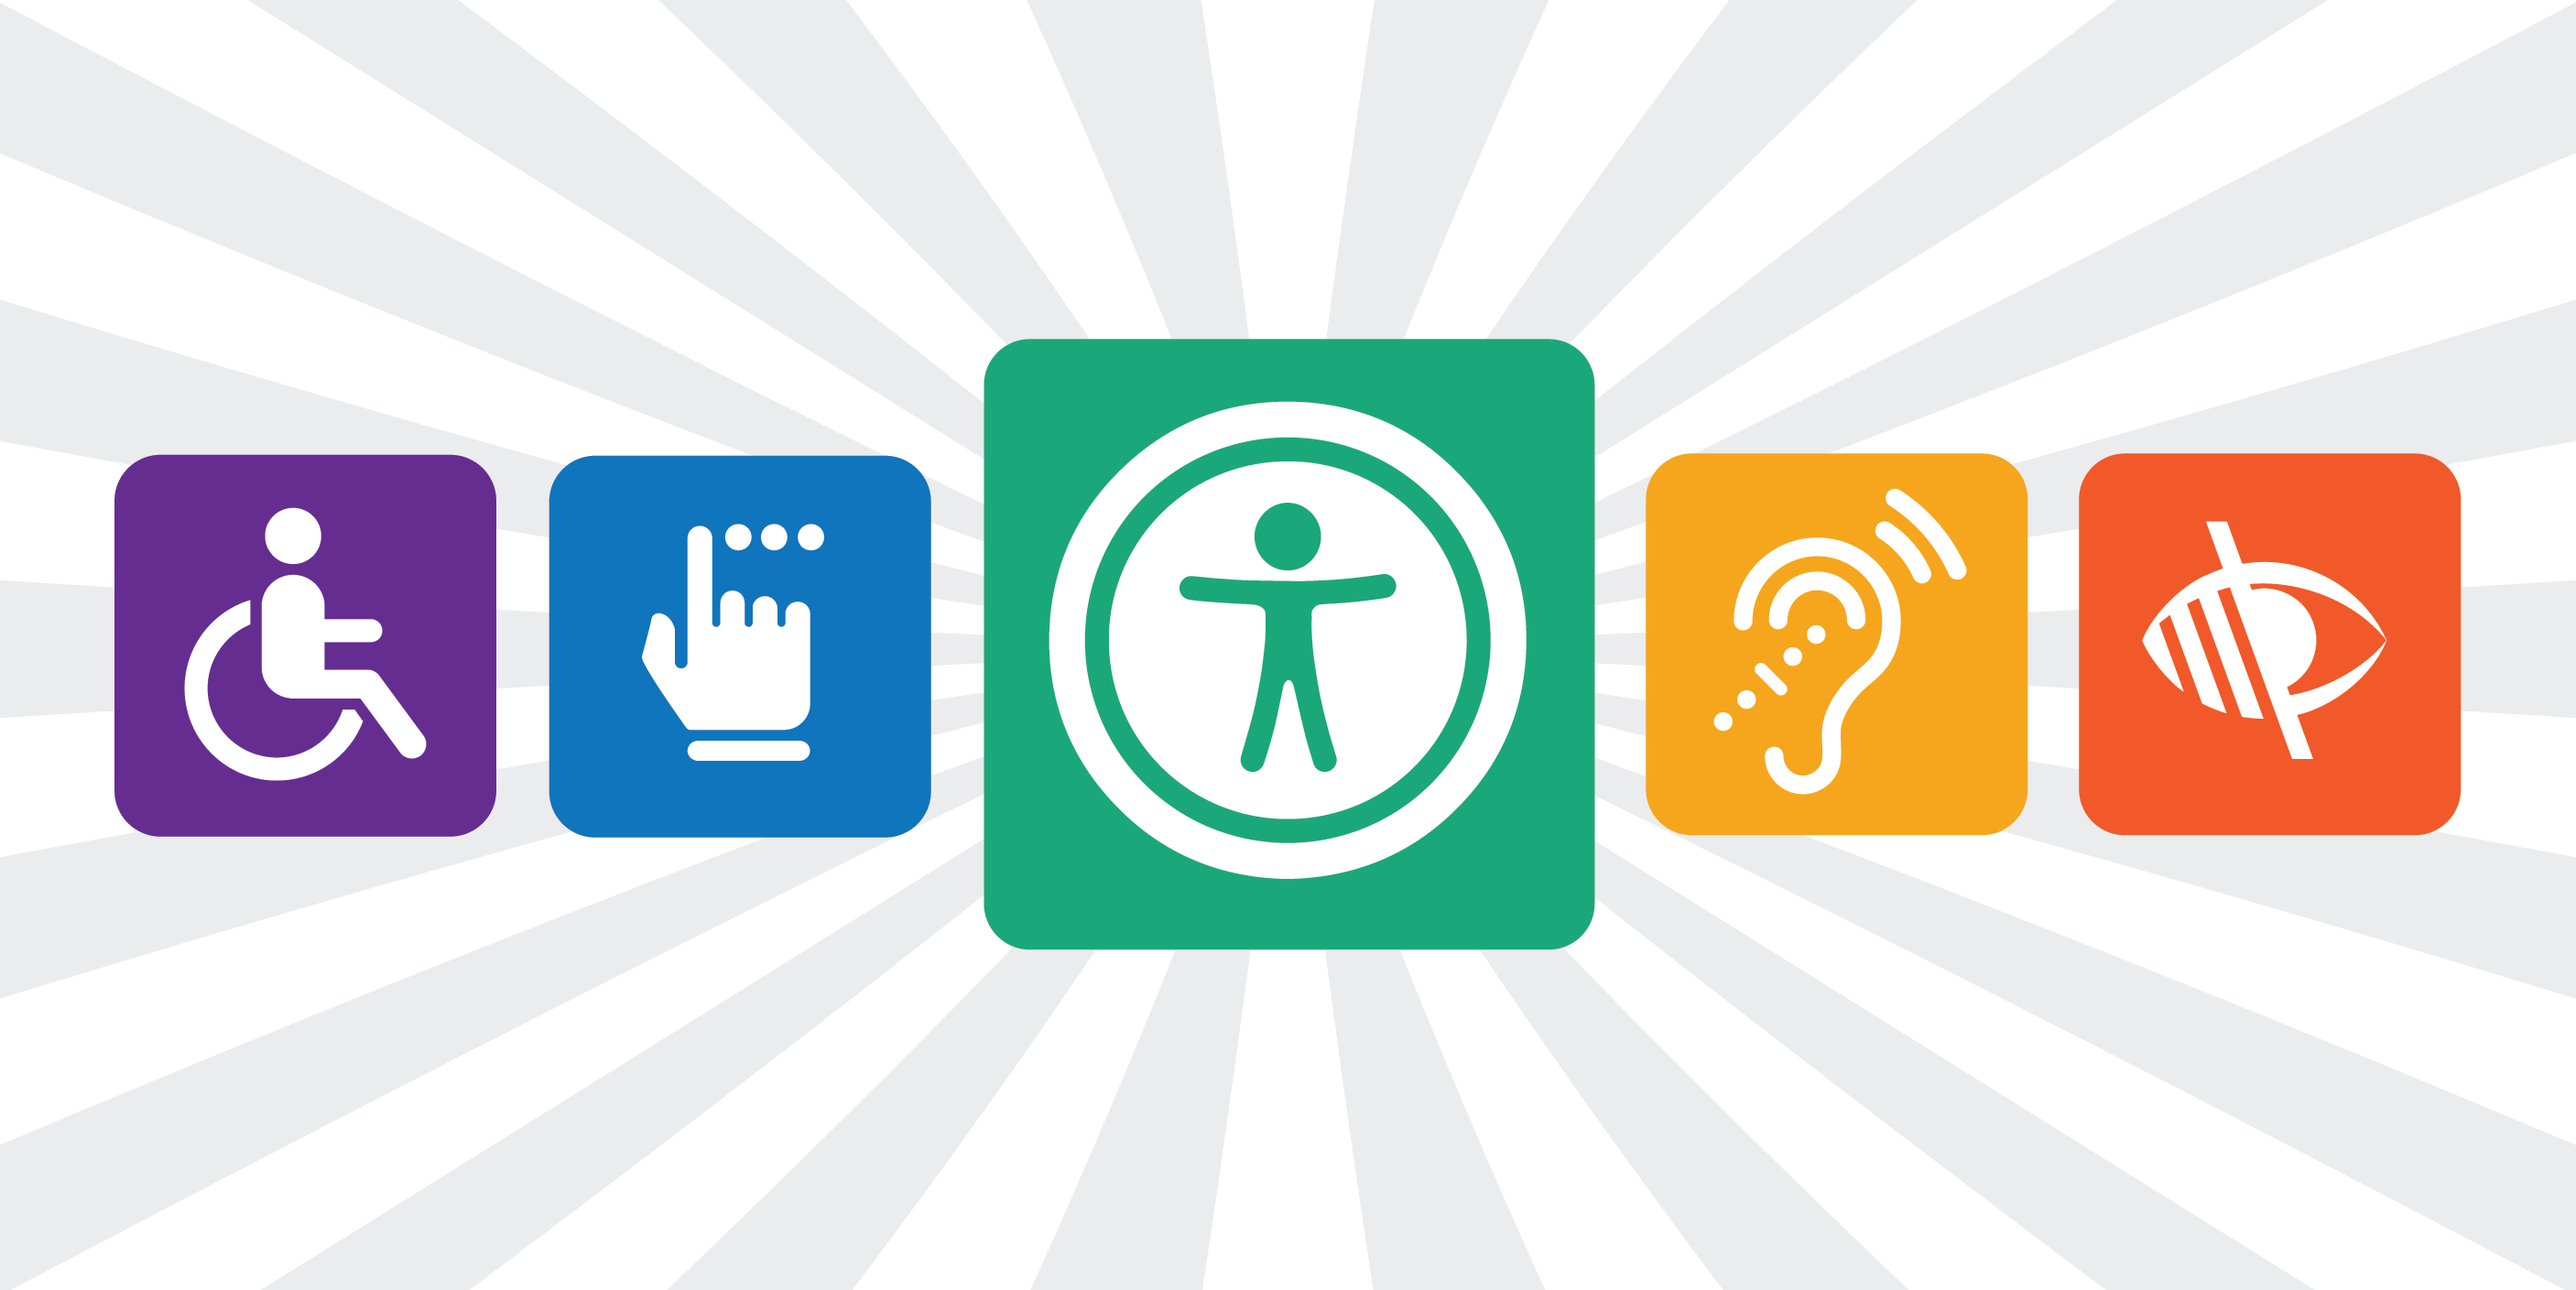 Collage of icons representing web accessibility. 